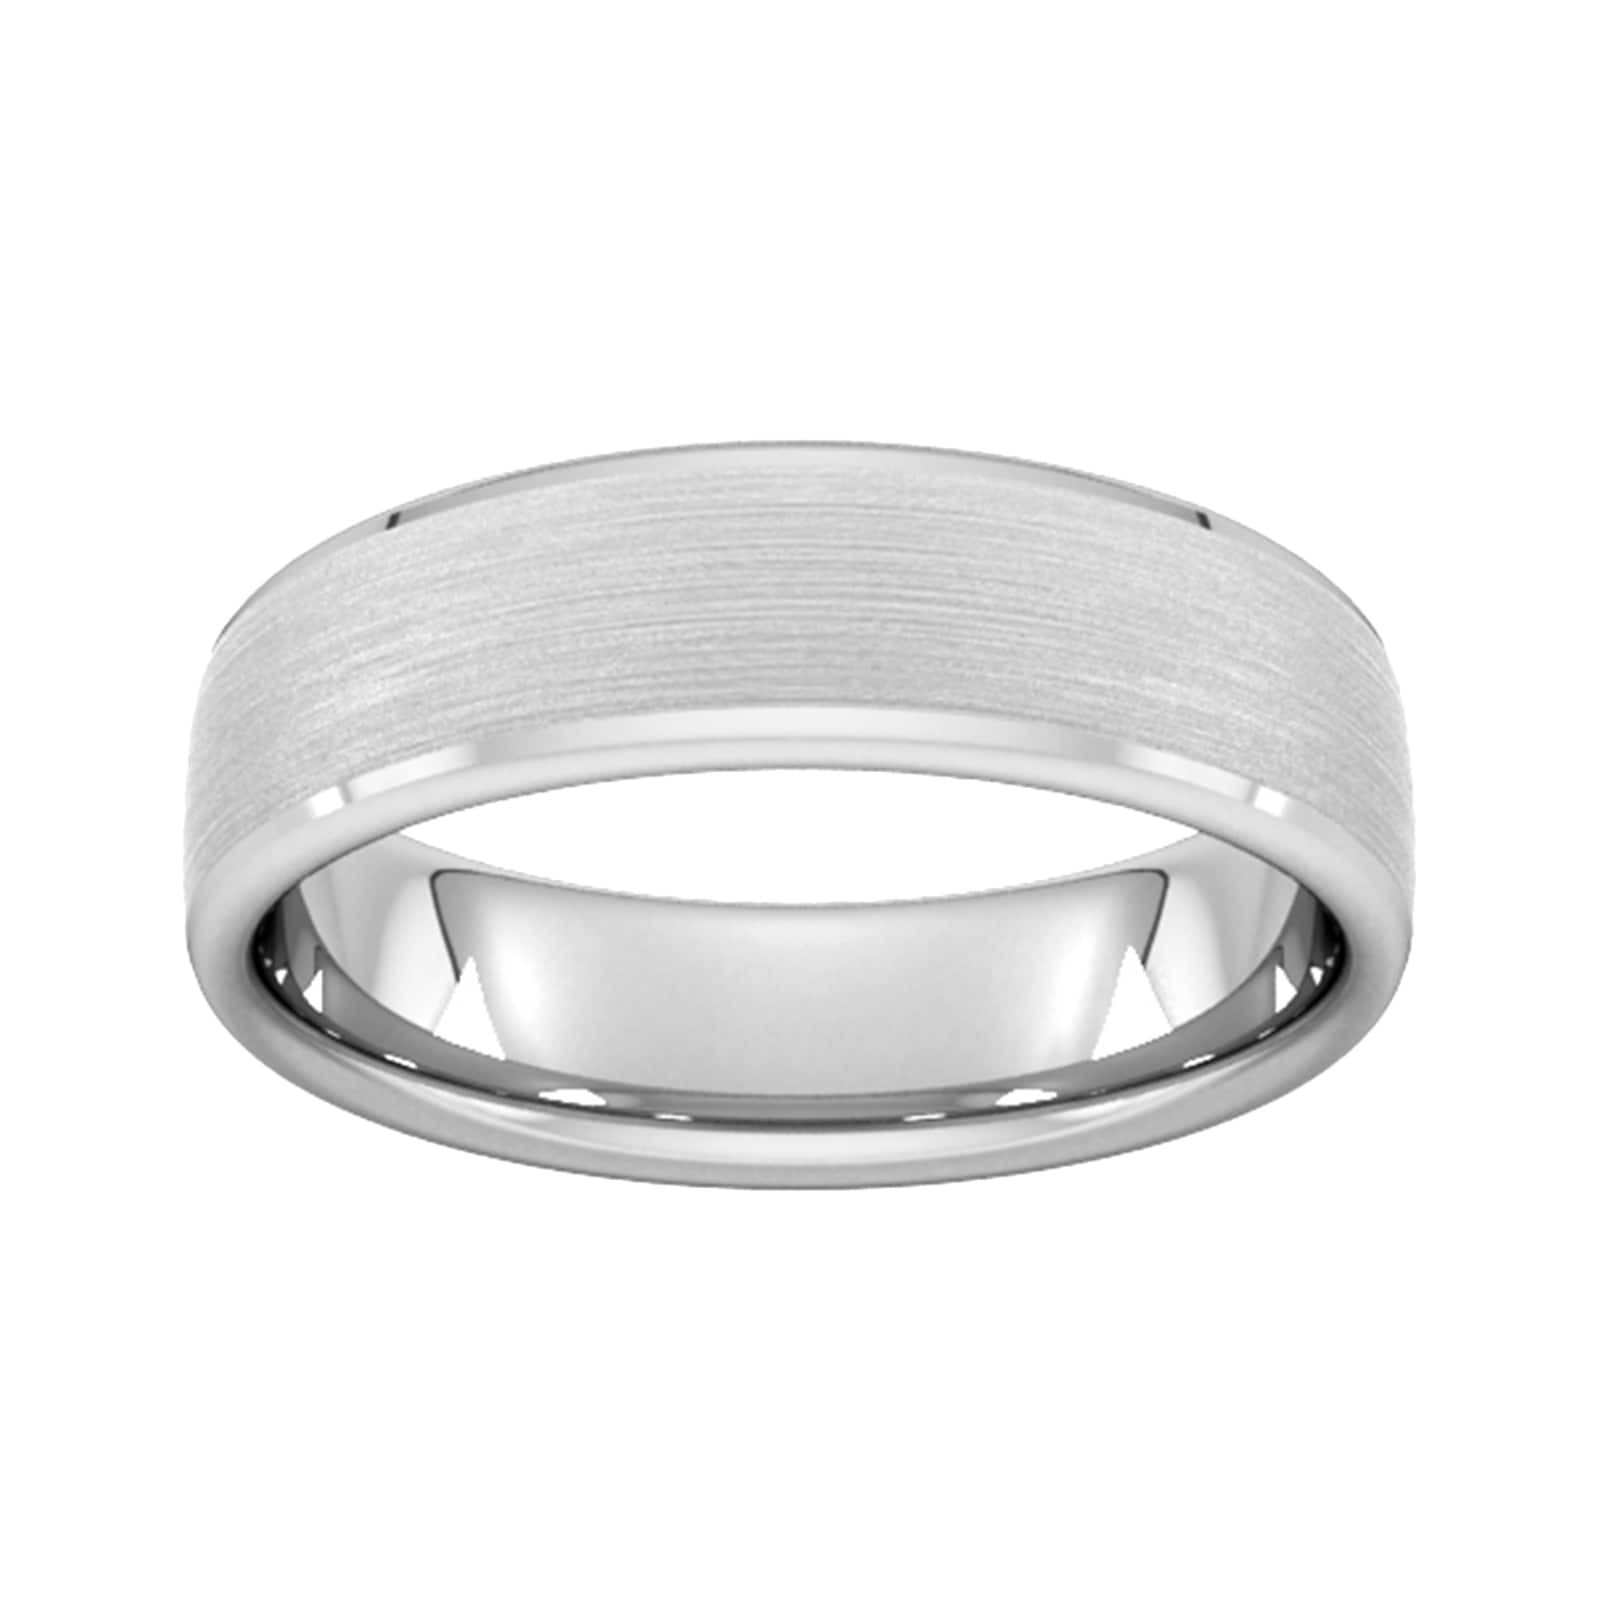 6mm Slight Court Standard Polished Chamfered Edges With Matt Centre Wedding Ring In 950 Palladium - Ring Size R